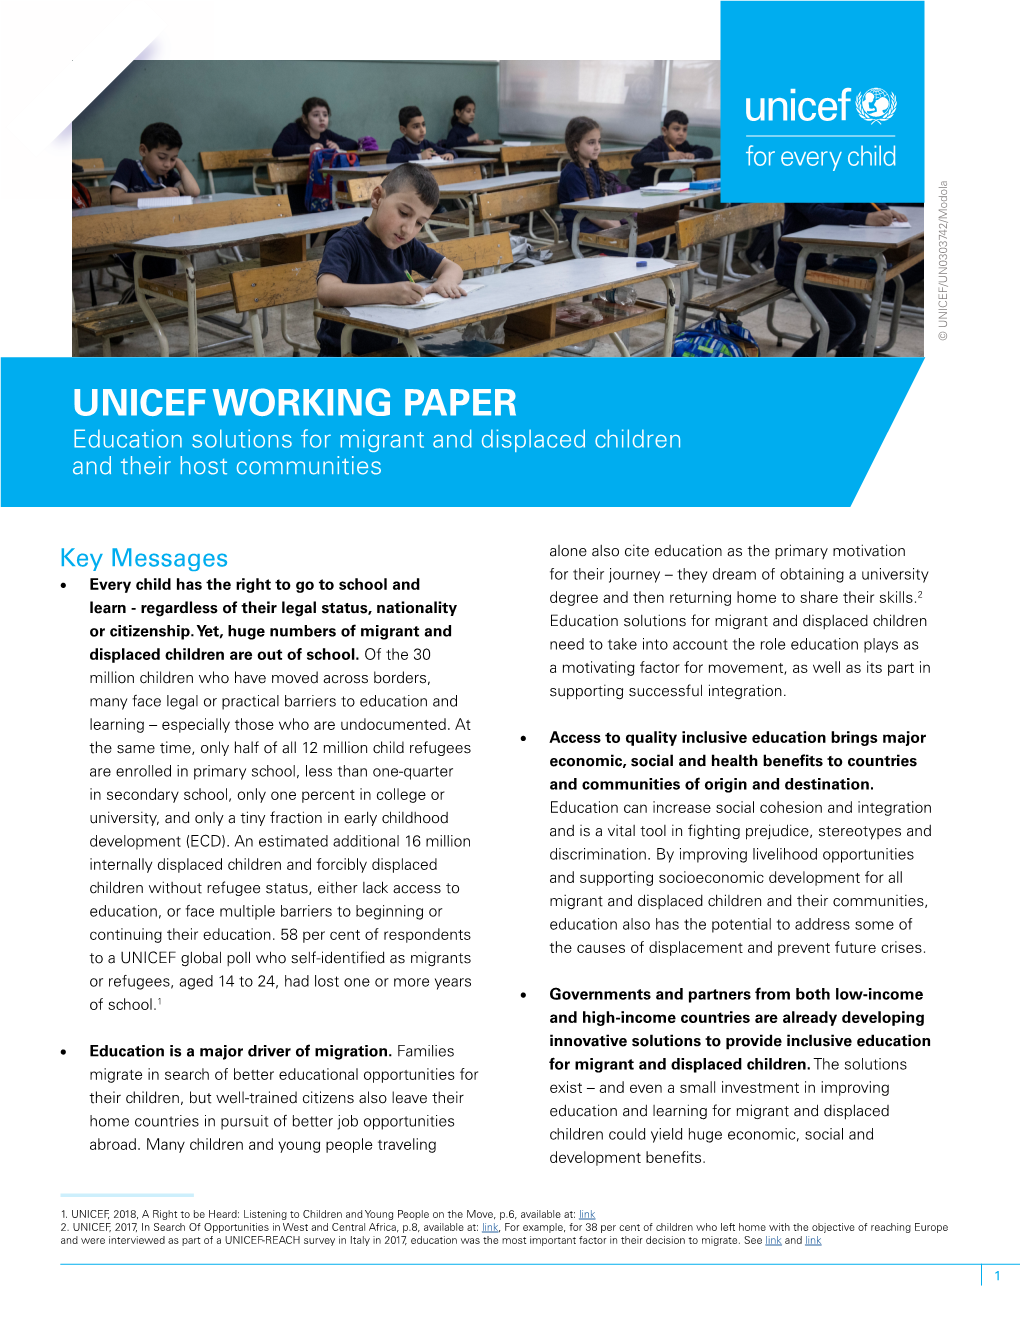 UNICEF WORKING PAPER Education Solutions for Migrant and Displaced Children and Their Host Communities